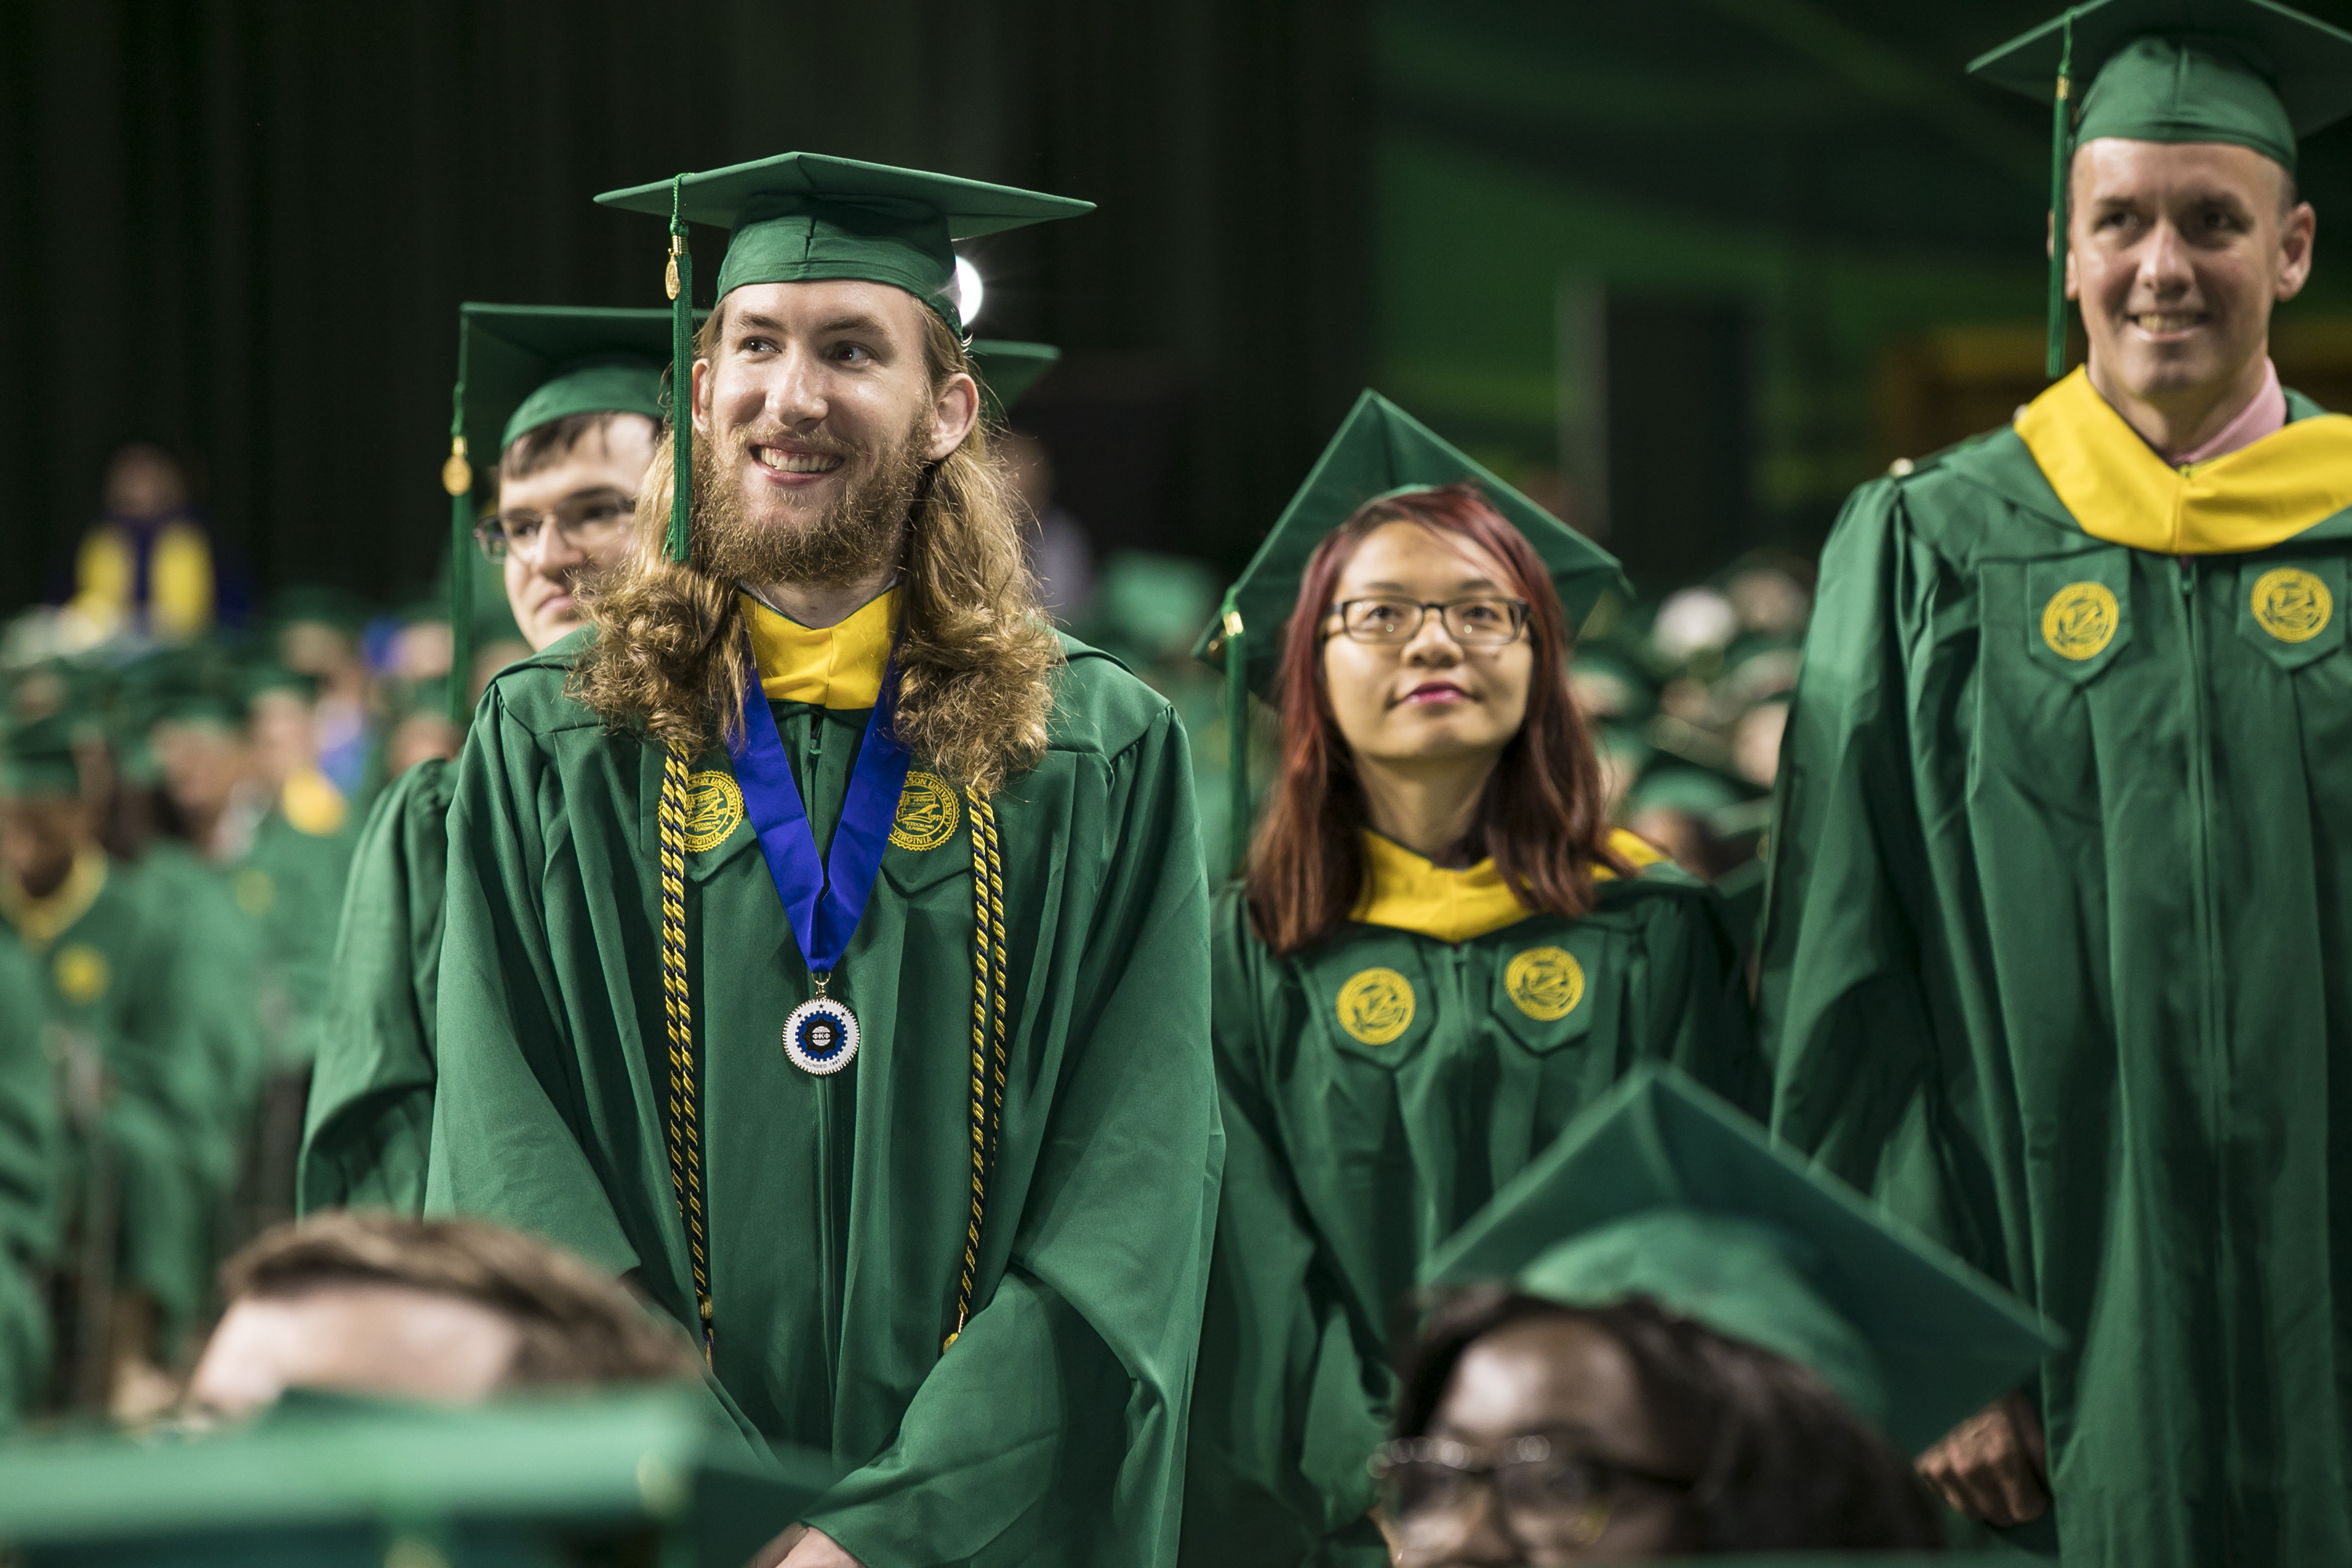 Largest graduating class to date to be honored at Barrett Honors College  spring convocation